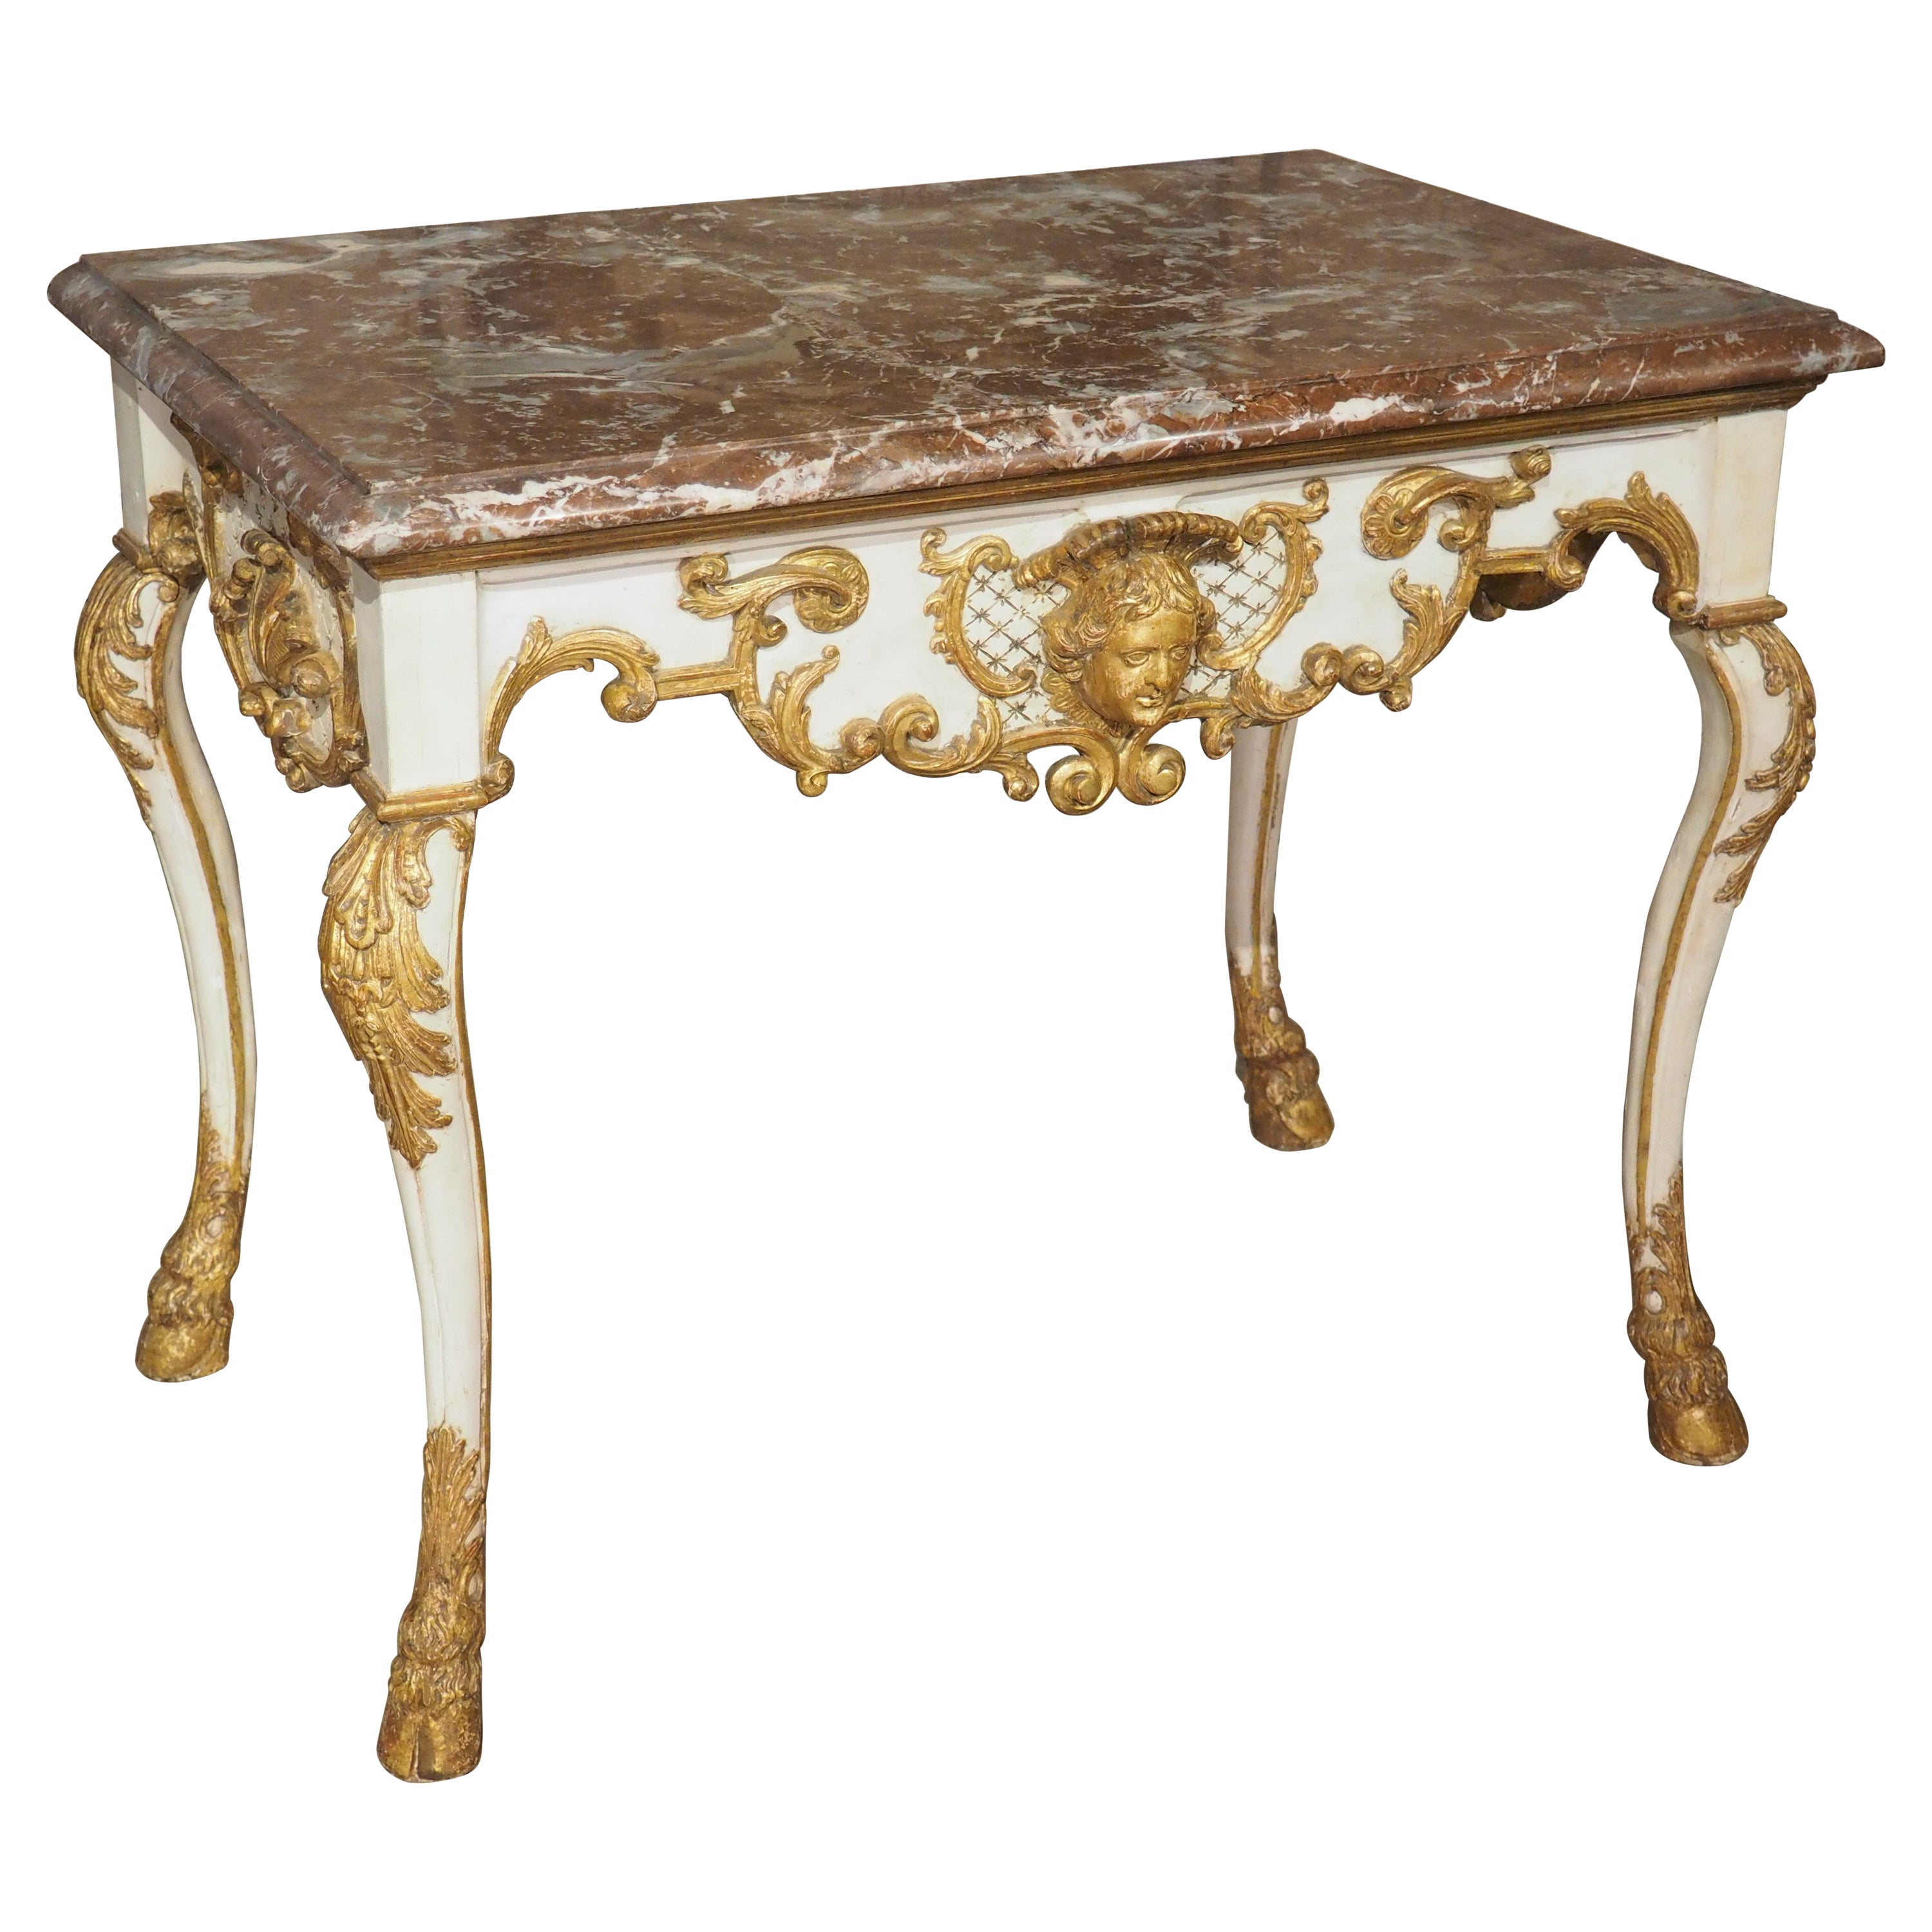 Early 18th Century Painted Italian Console Table with Rouge Royal Marble Top For Sale